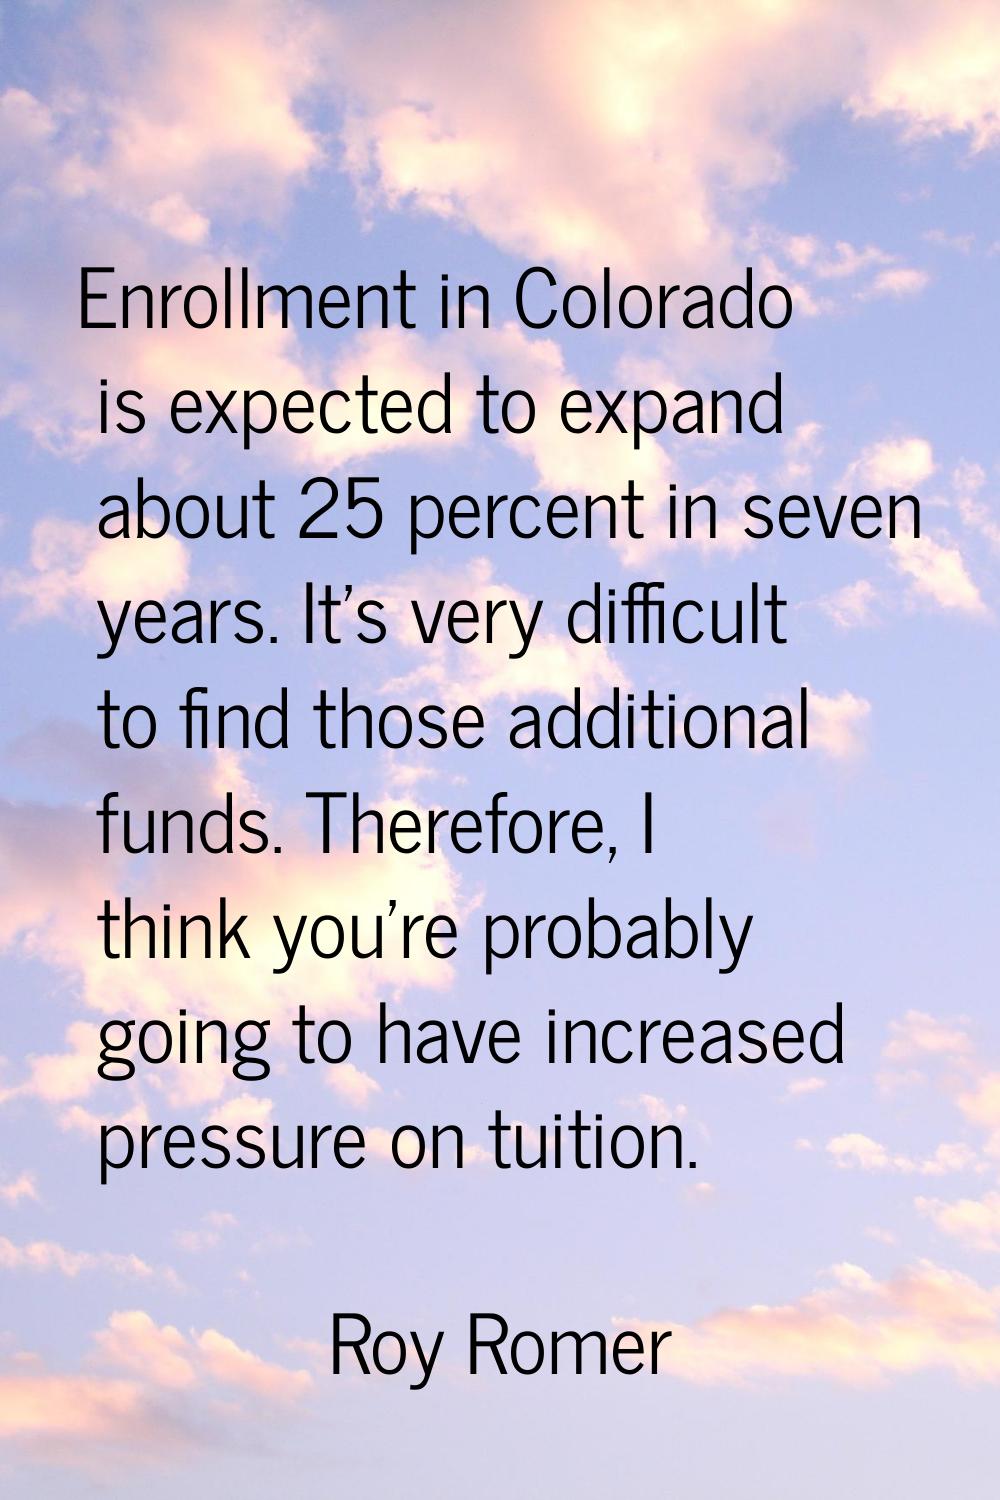 Enrollment in Colorado is expected to expand about 25 percent in seven years. It's very difficult t